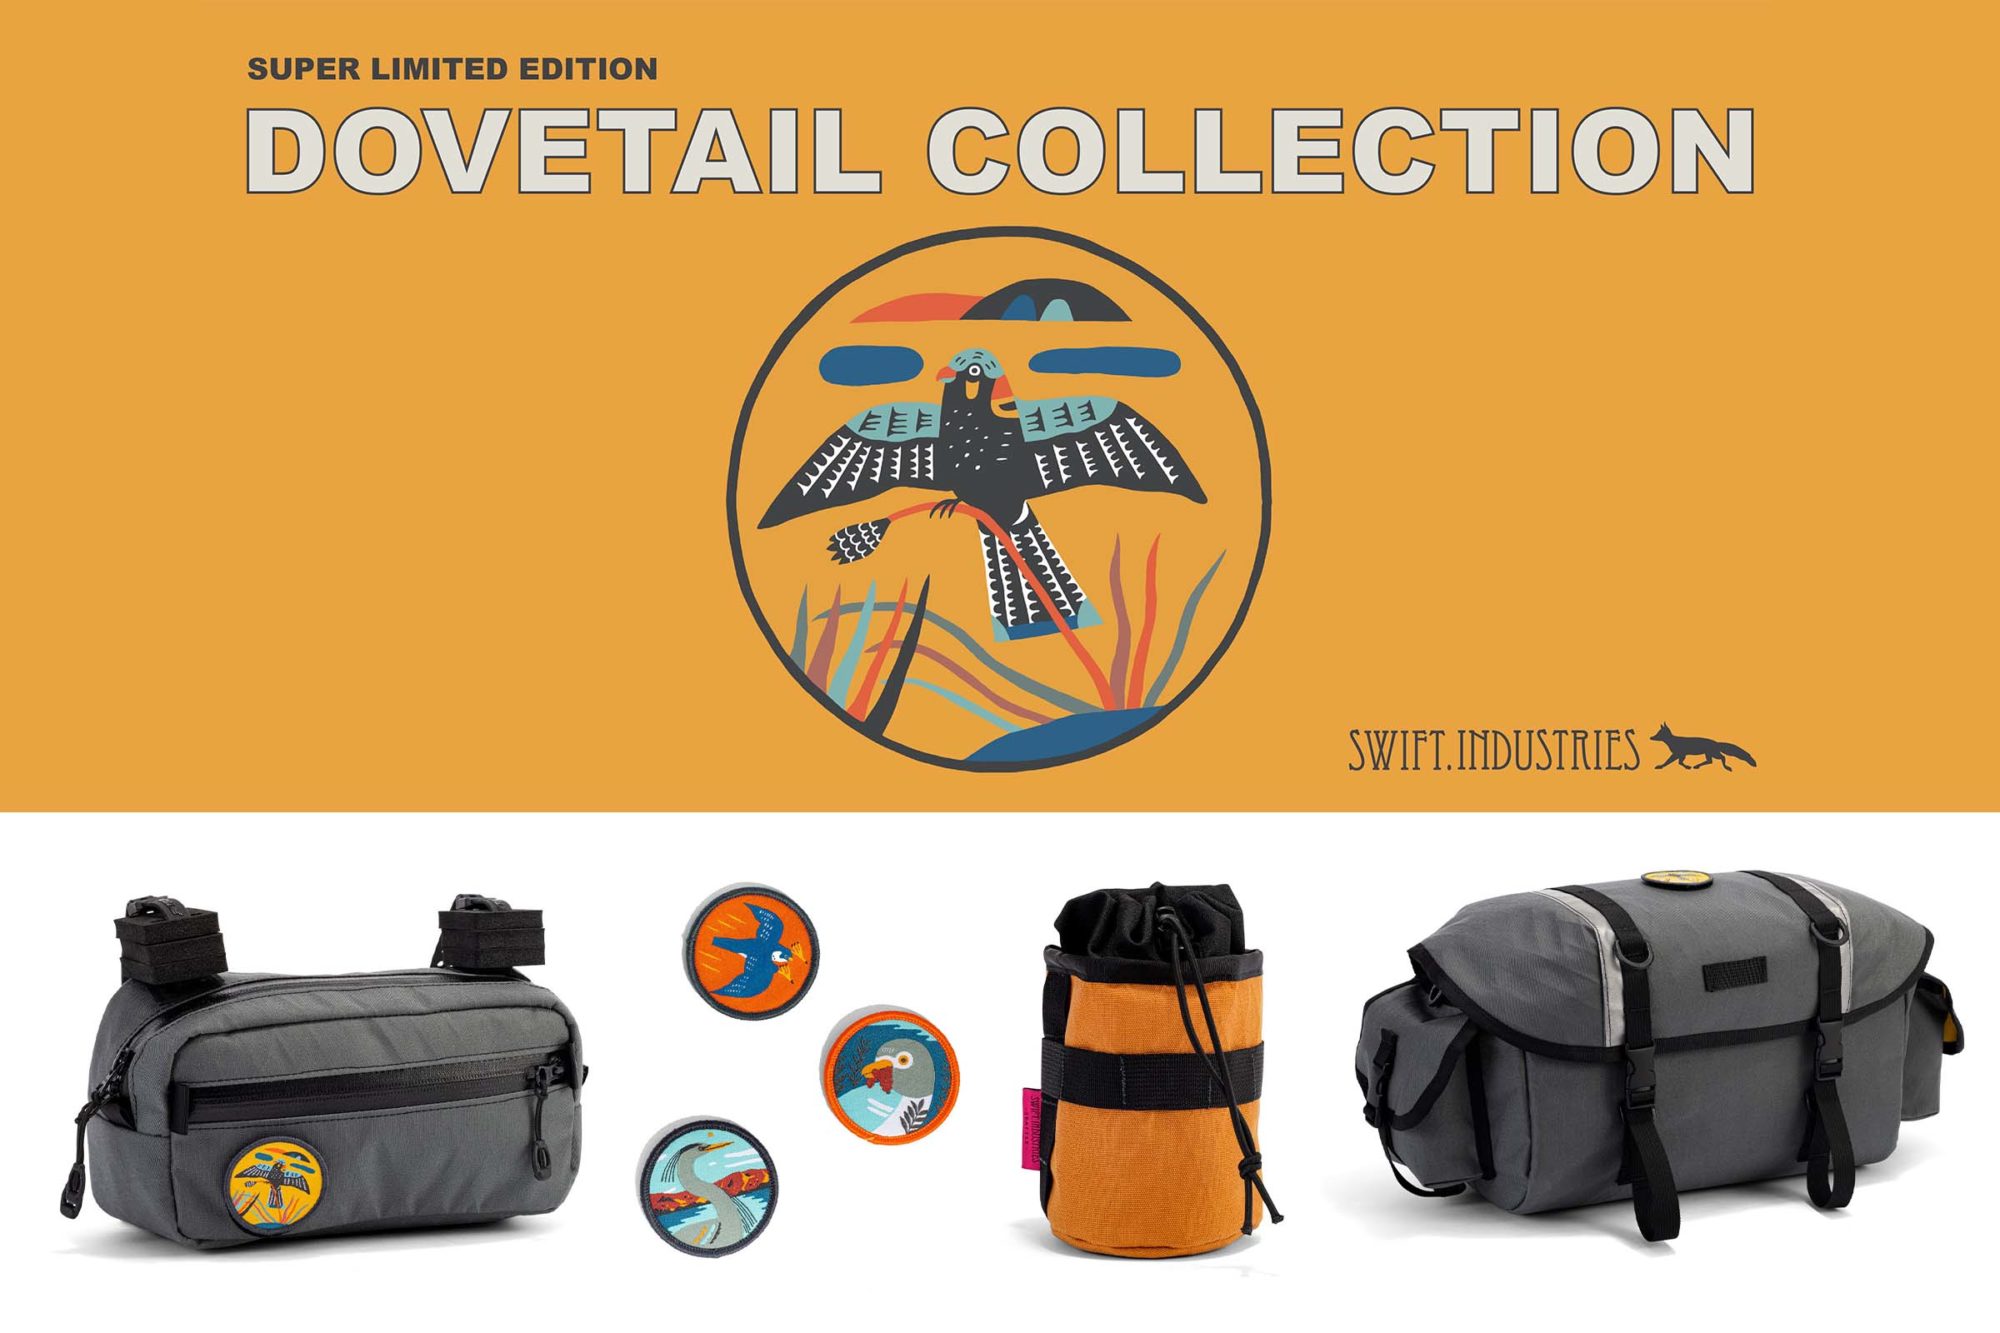 Introducing the Swift Industries Dovetail Collection - BIKEPACKING.com